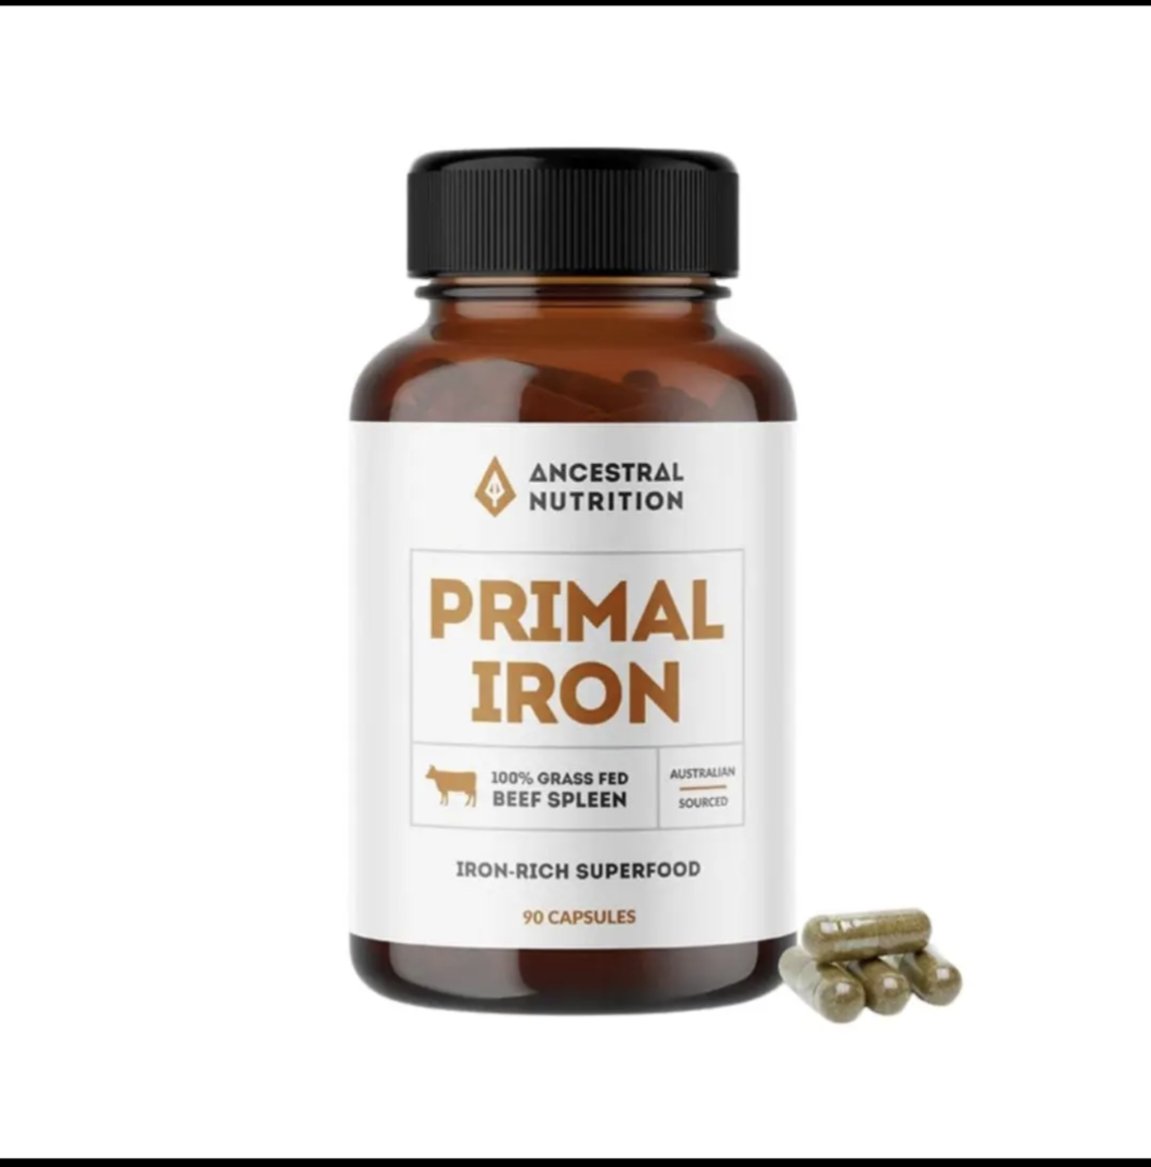 Ancestral Nutrition, Primal Iron (100% Grass-Fed Beef Spleen), 90 Capsules - #shop_name - Organ meat - -Ancestral Nutrition